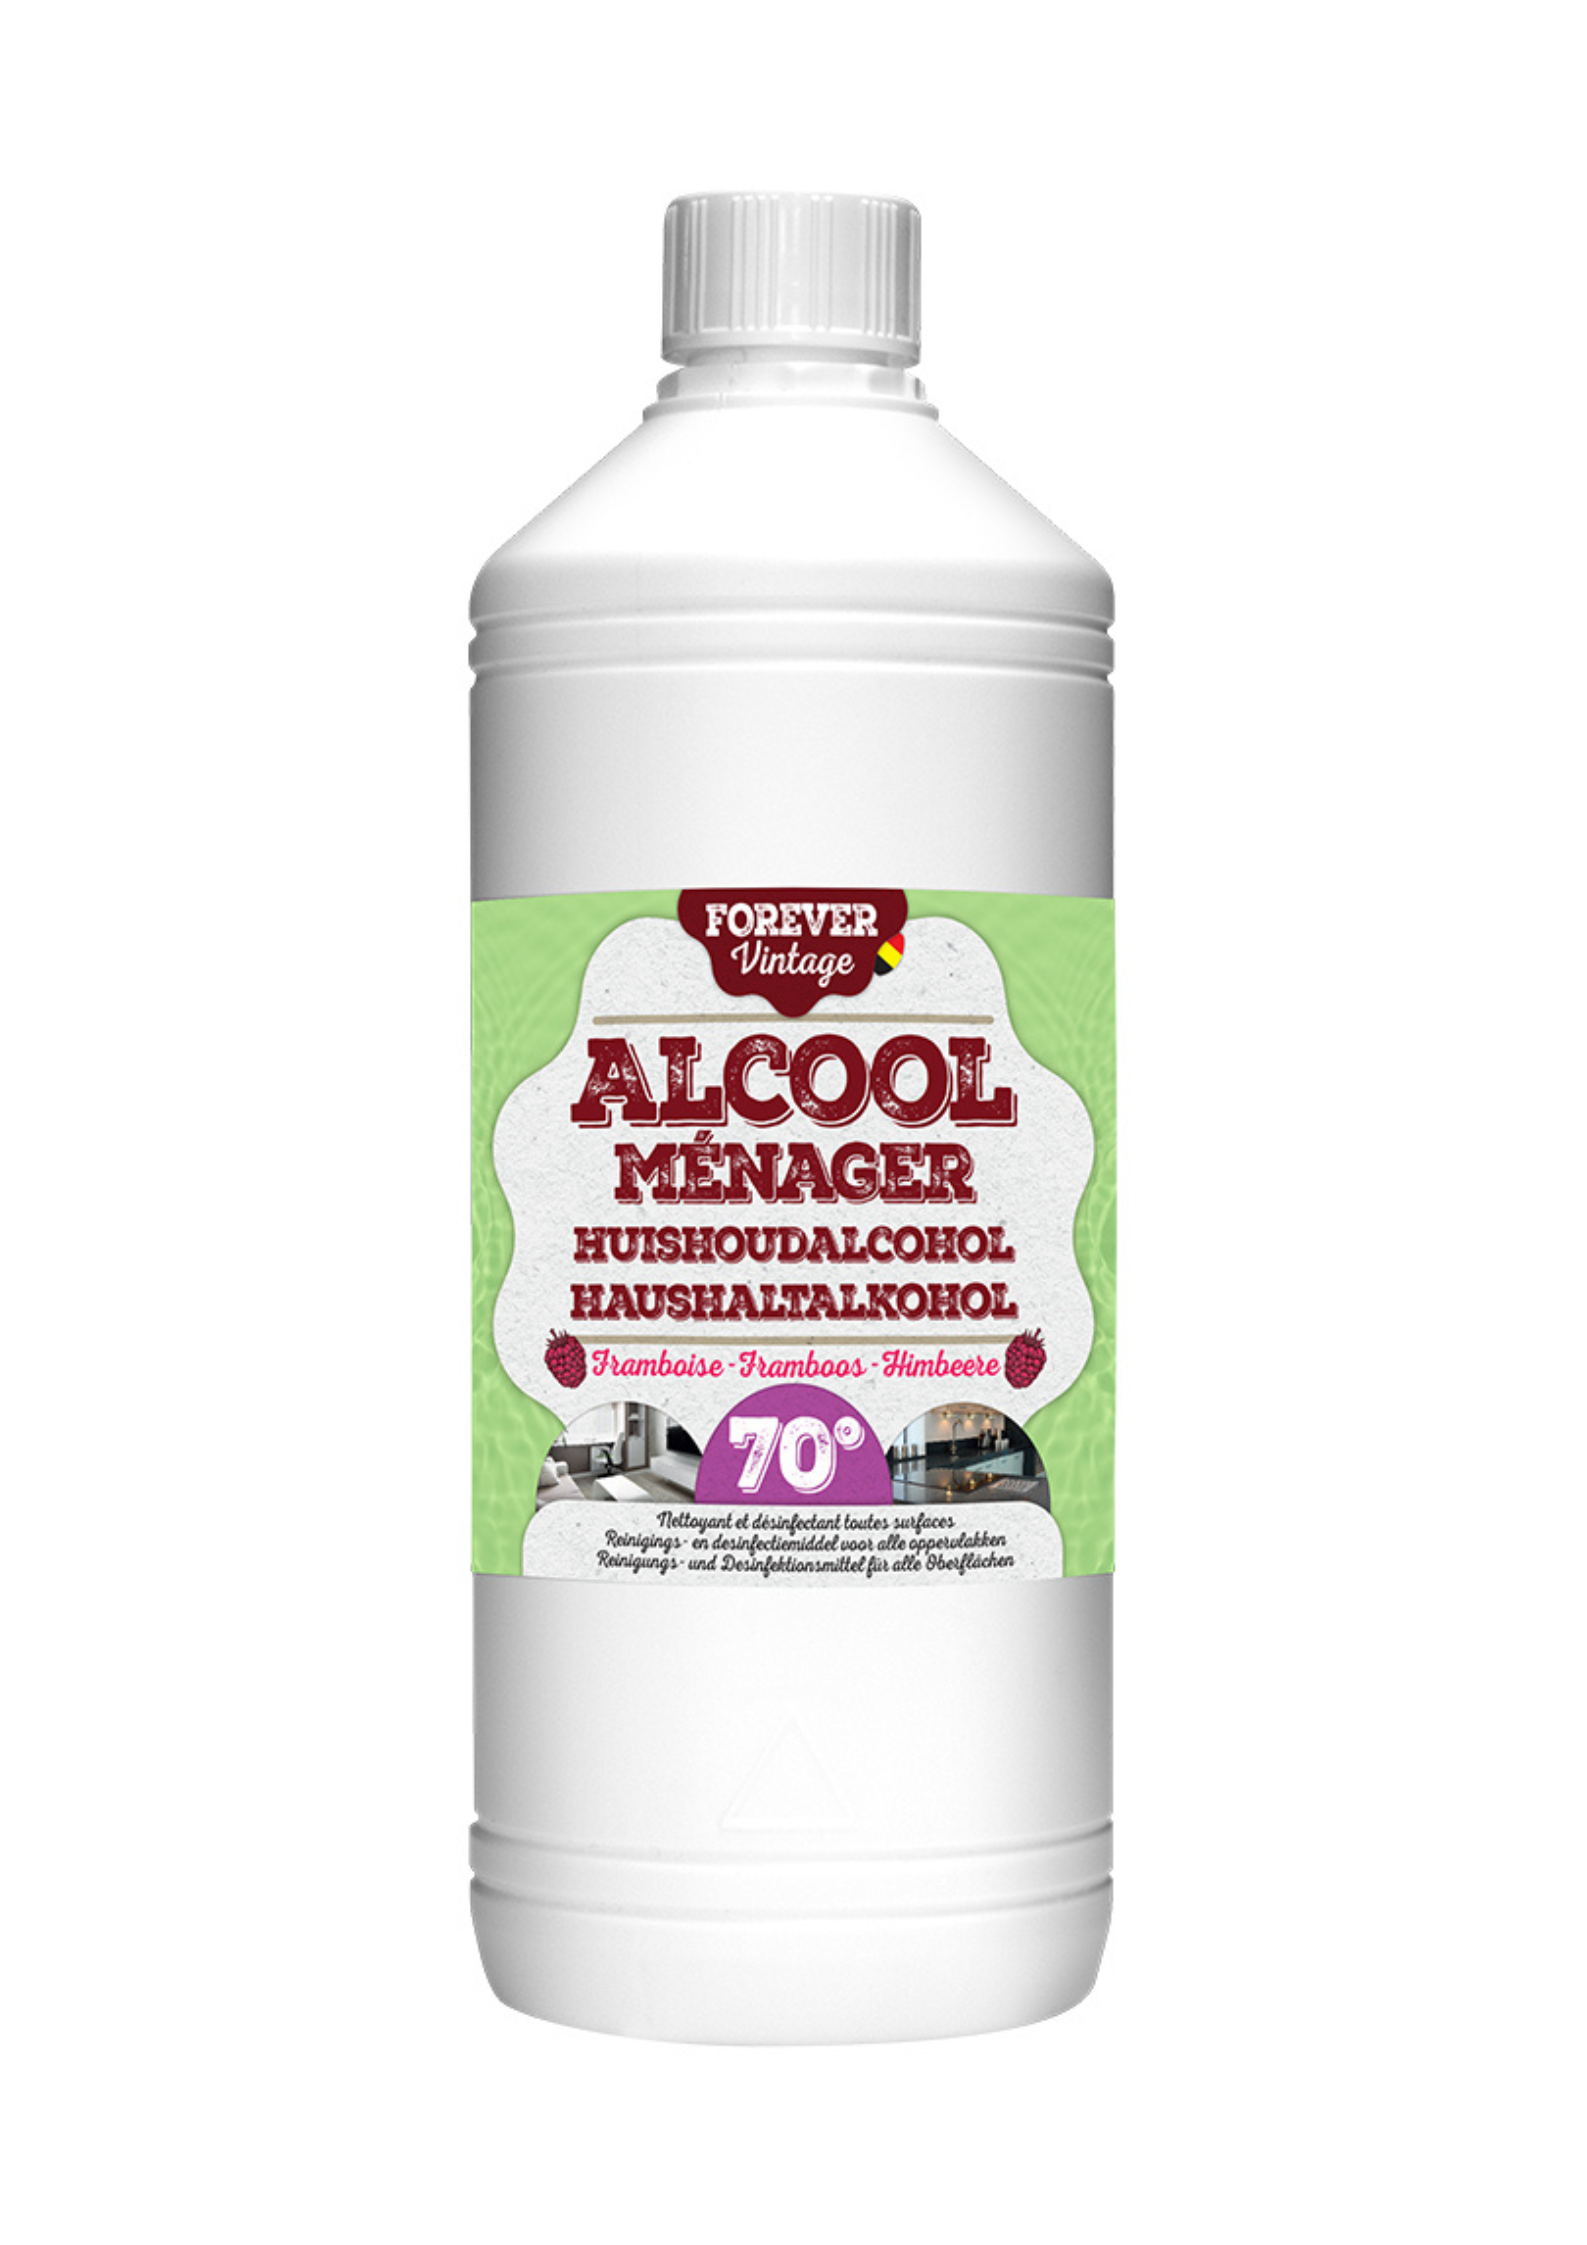 Forever alcool ménager 1l